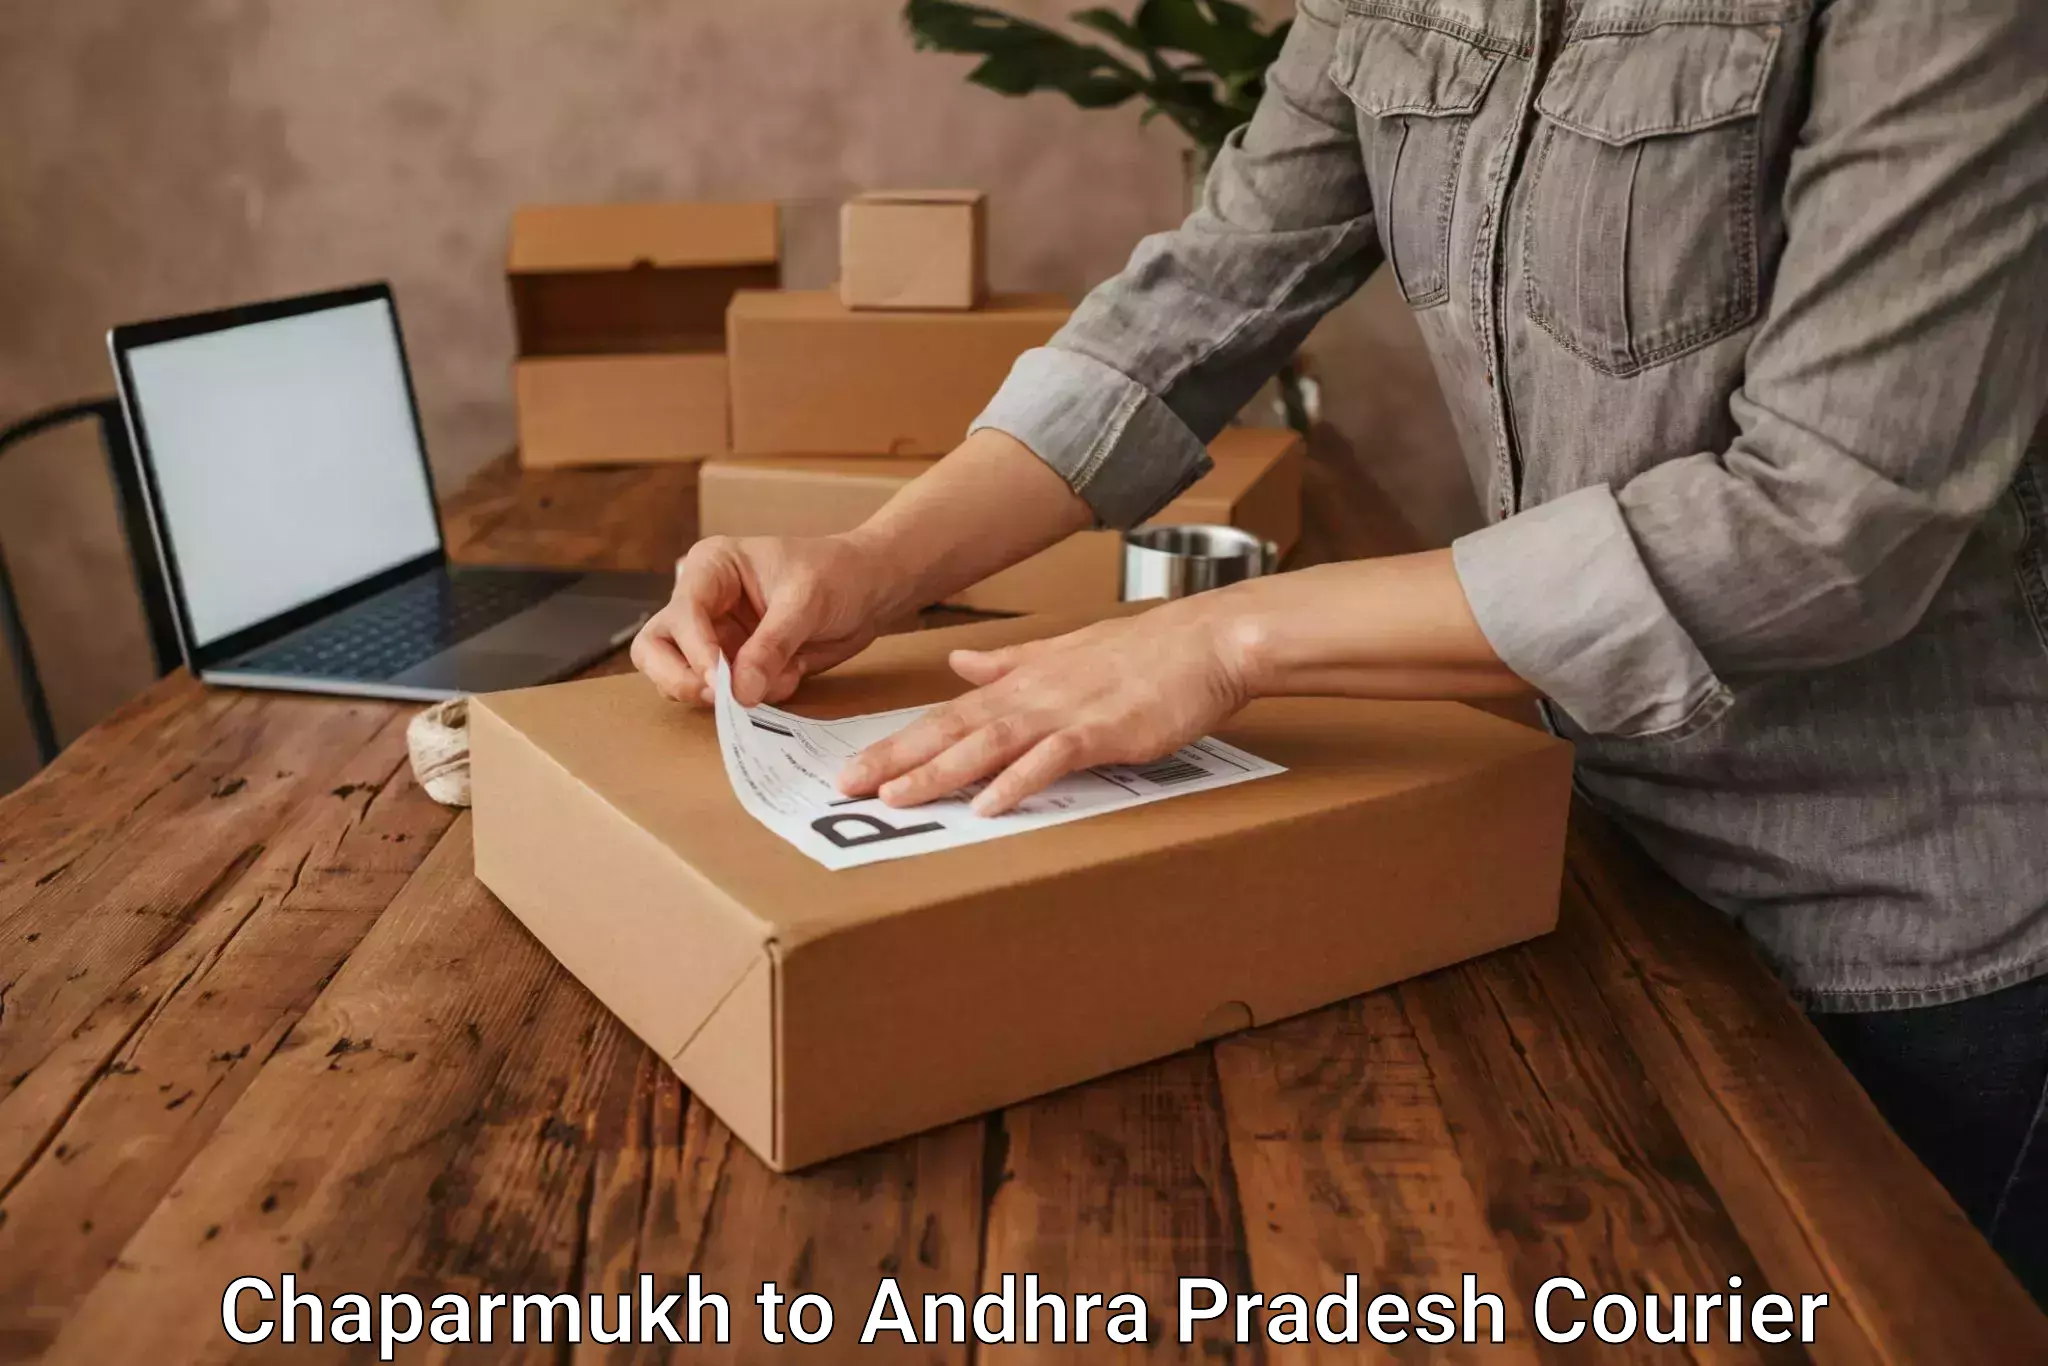 Courier service innovation Chaparmukh to Andhra Pradesh